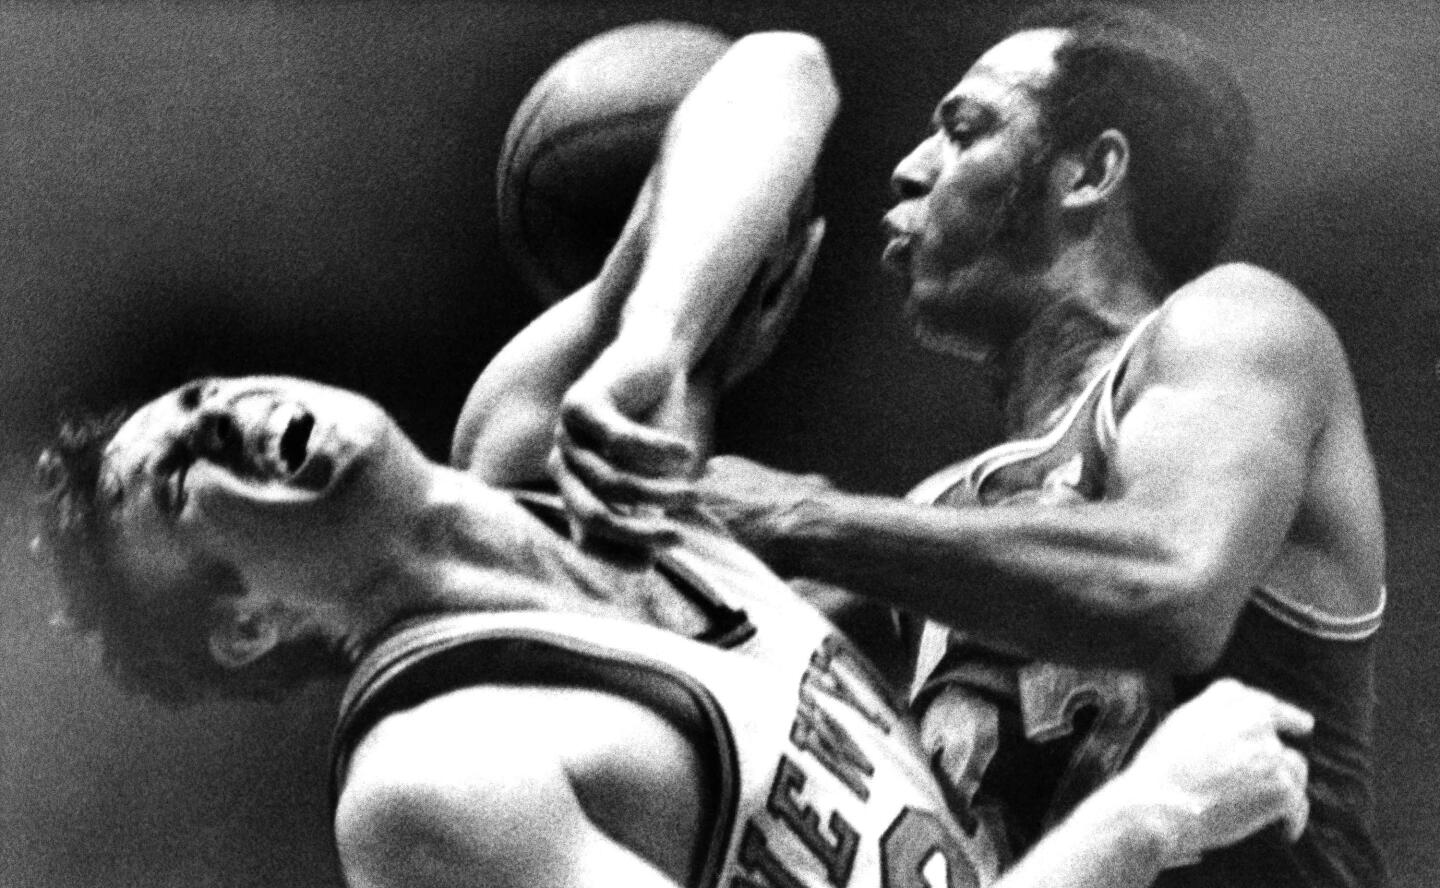 New York Knicks' Dave DeBusschere winces as he and the Los Angeles Lakers' Elgin Baylor collide in the first period of a game at New York’s Madison Square Garden on April 24, 1970.